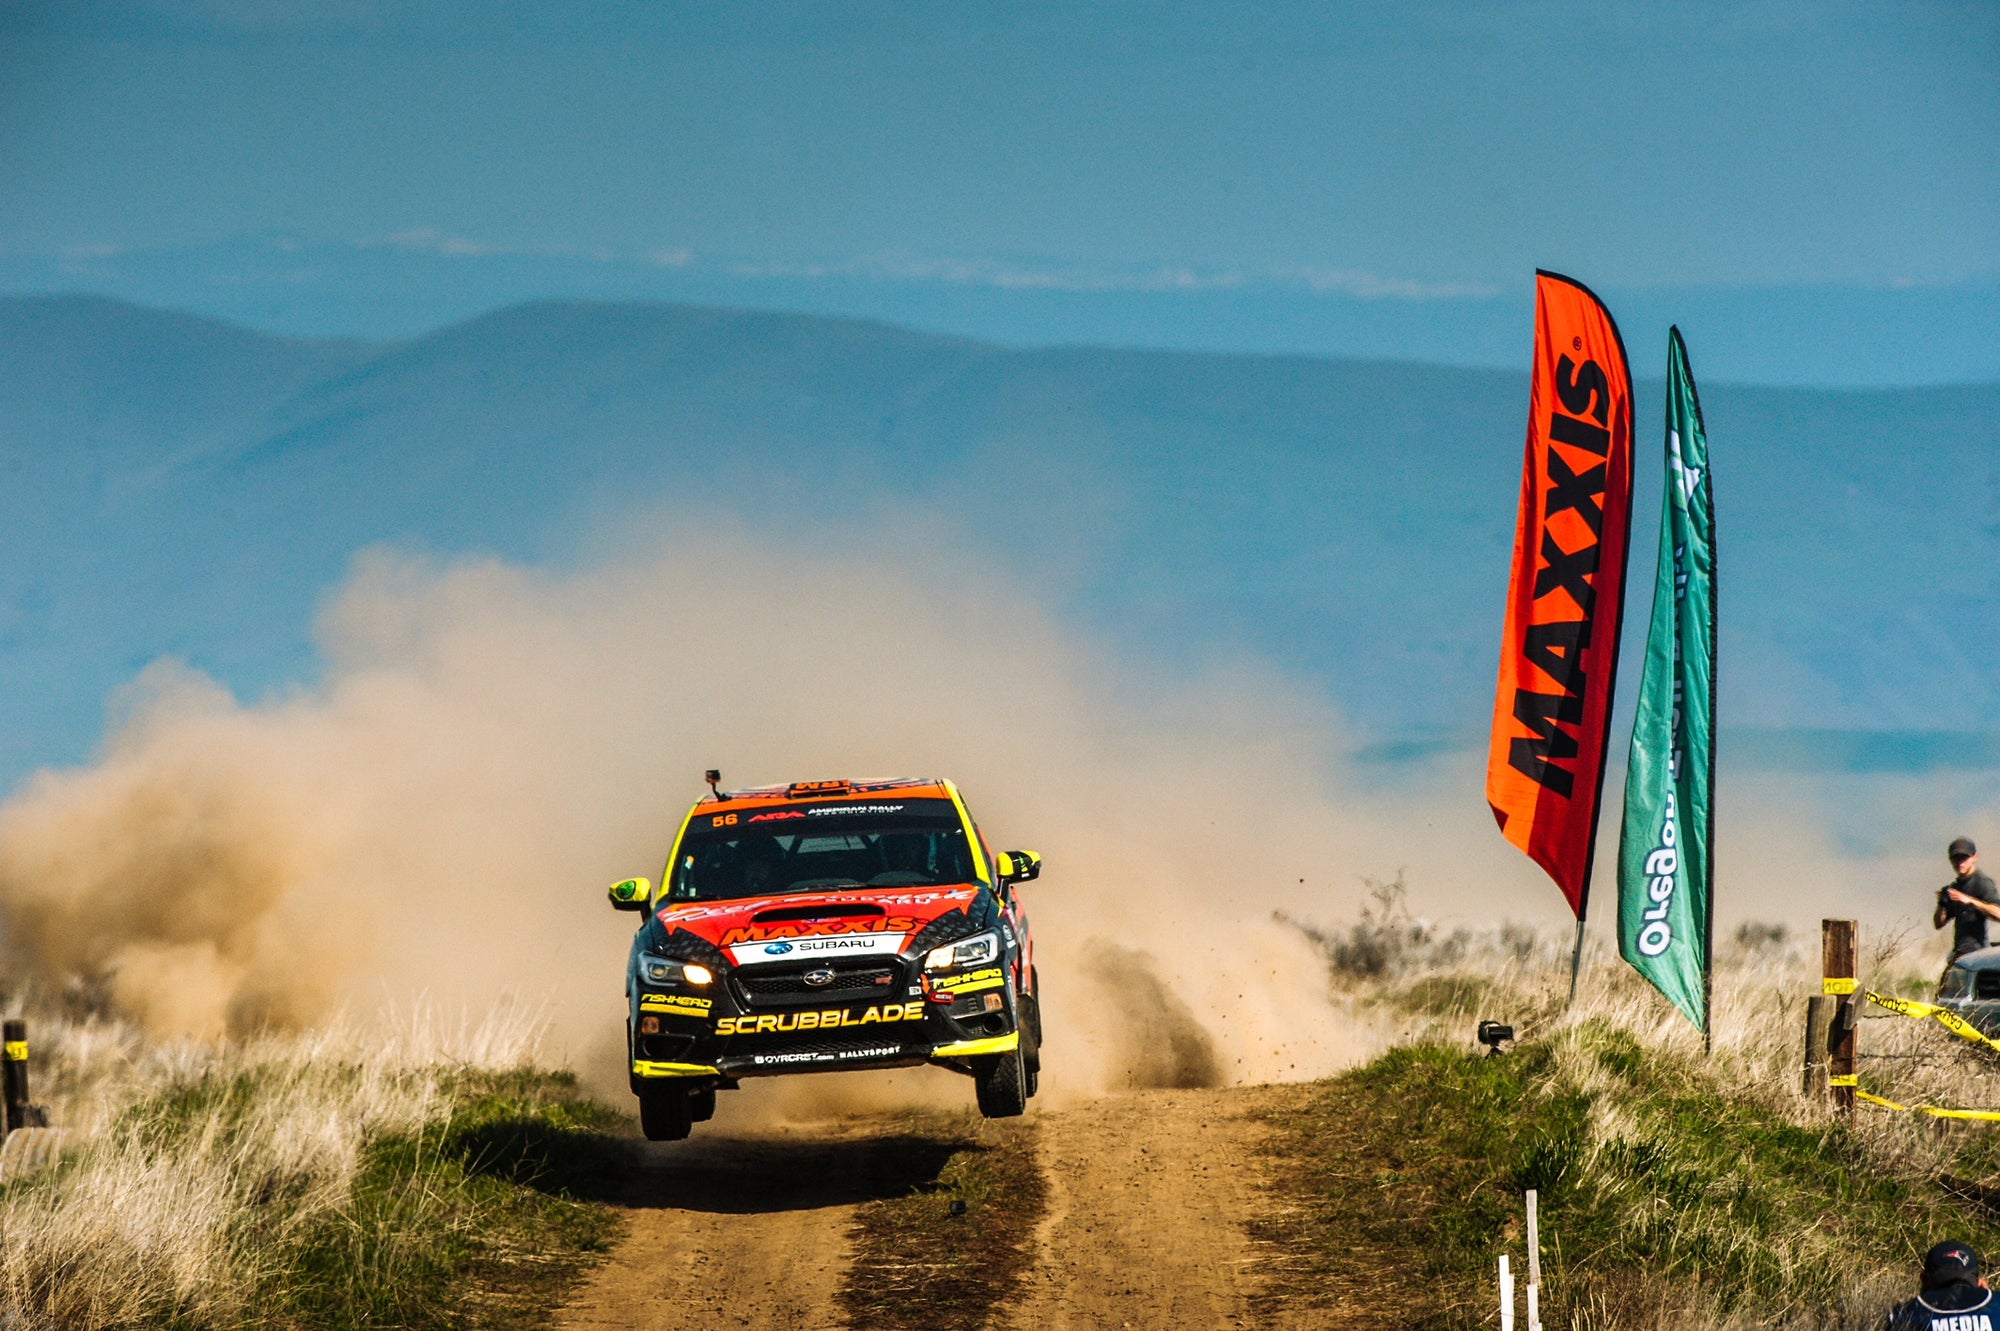 Seehorn Rally Team Scores 1st Win of the Season at Oregon Trail Rally